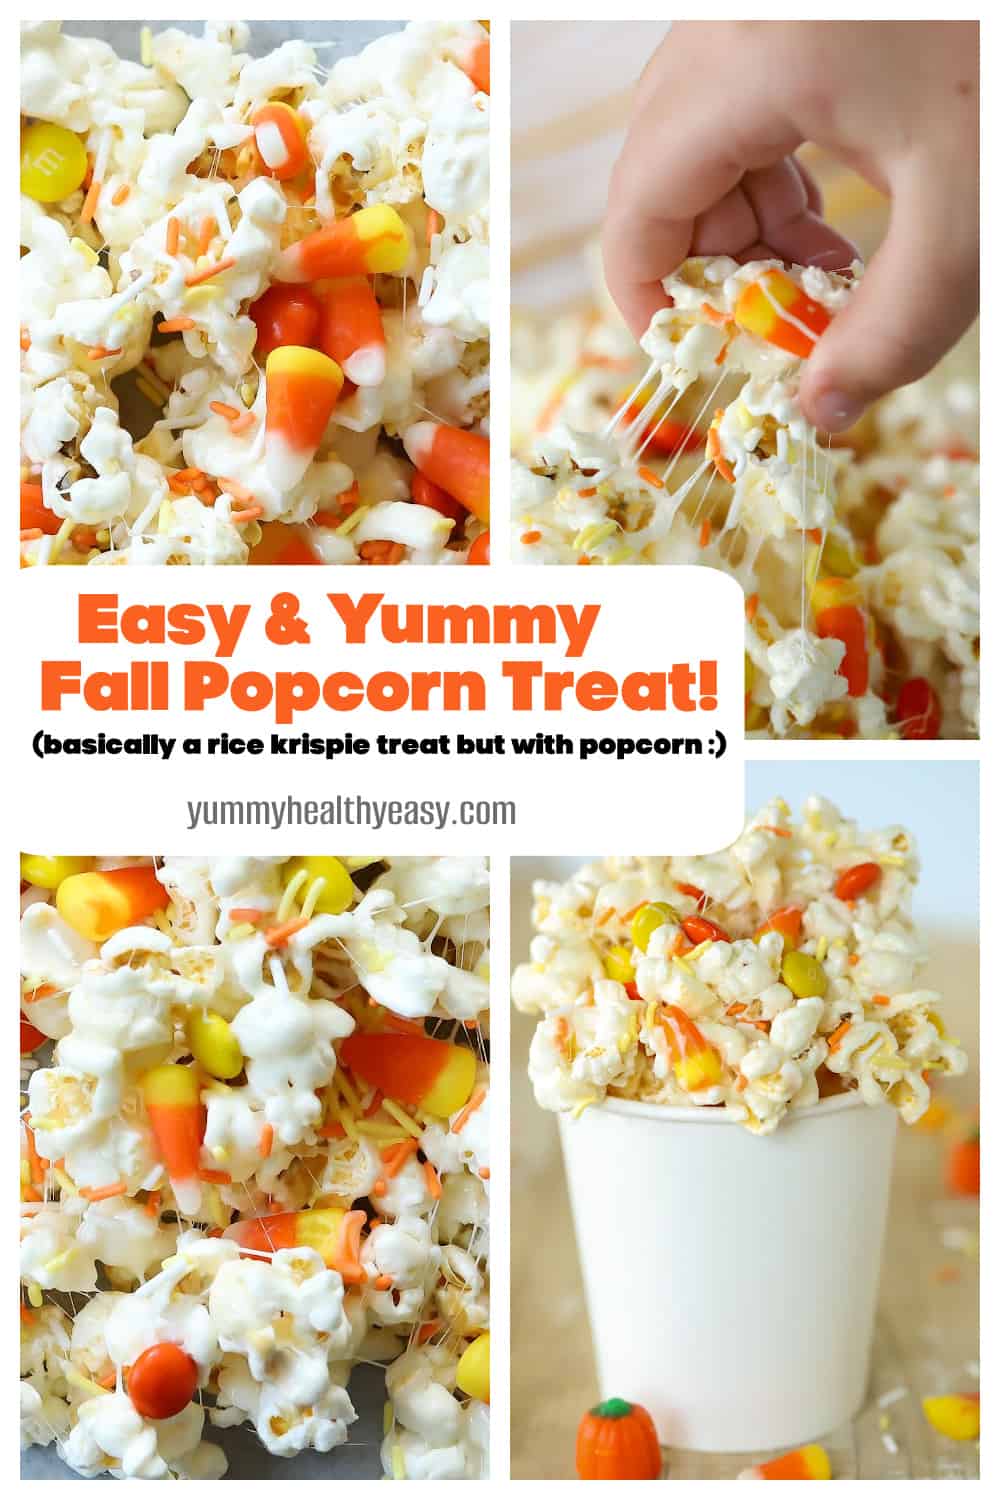 This Easy Marshmallow Fall Candy Corn Popcorn Treat combines Candy Corn, M&M's and Popcorn in one fun dessert that's easy to make and will be the hit at any fall party! #dessert #candycorn #fall #halloween #easydessert #popcorntreat #falltreat via @jennikolaus